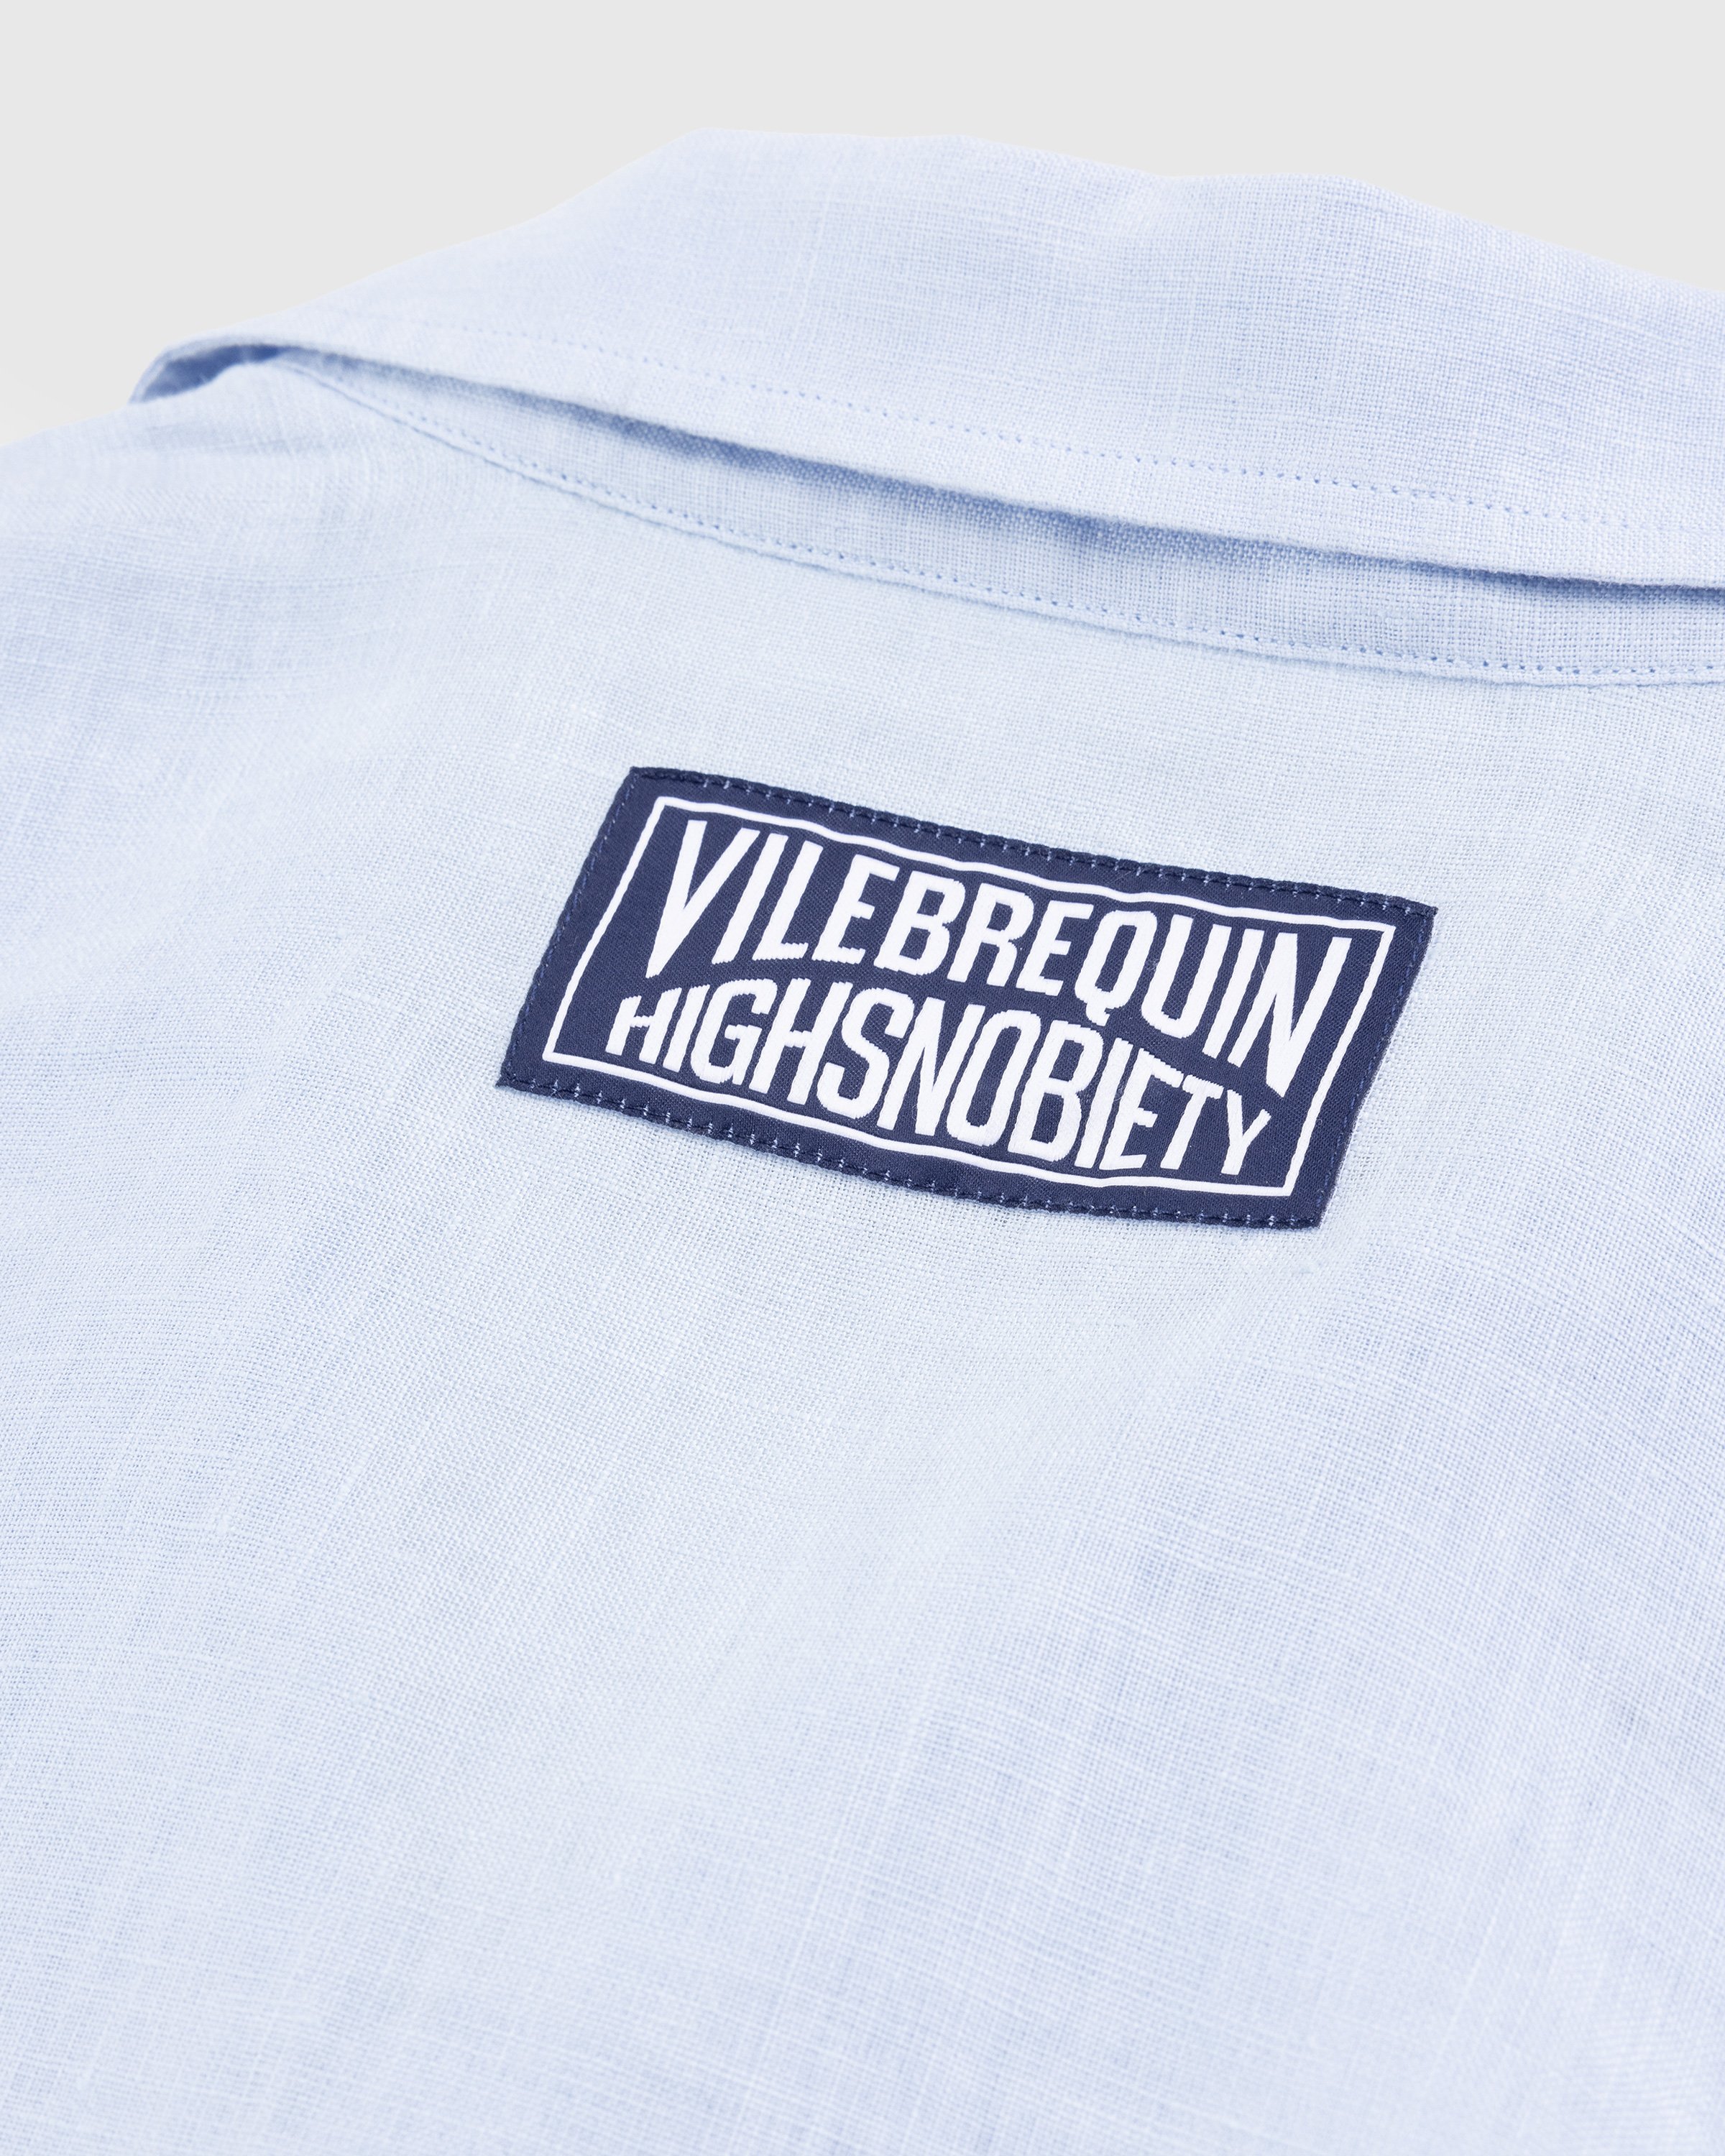 Vilebrequin x Highsnobiety - Solid Bowling Shirt Chambray - Clothing - Blue - Image 4